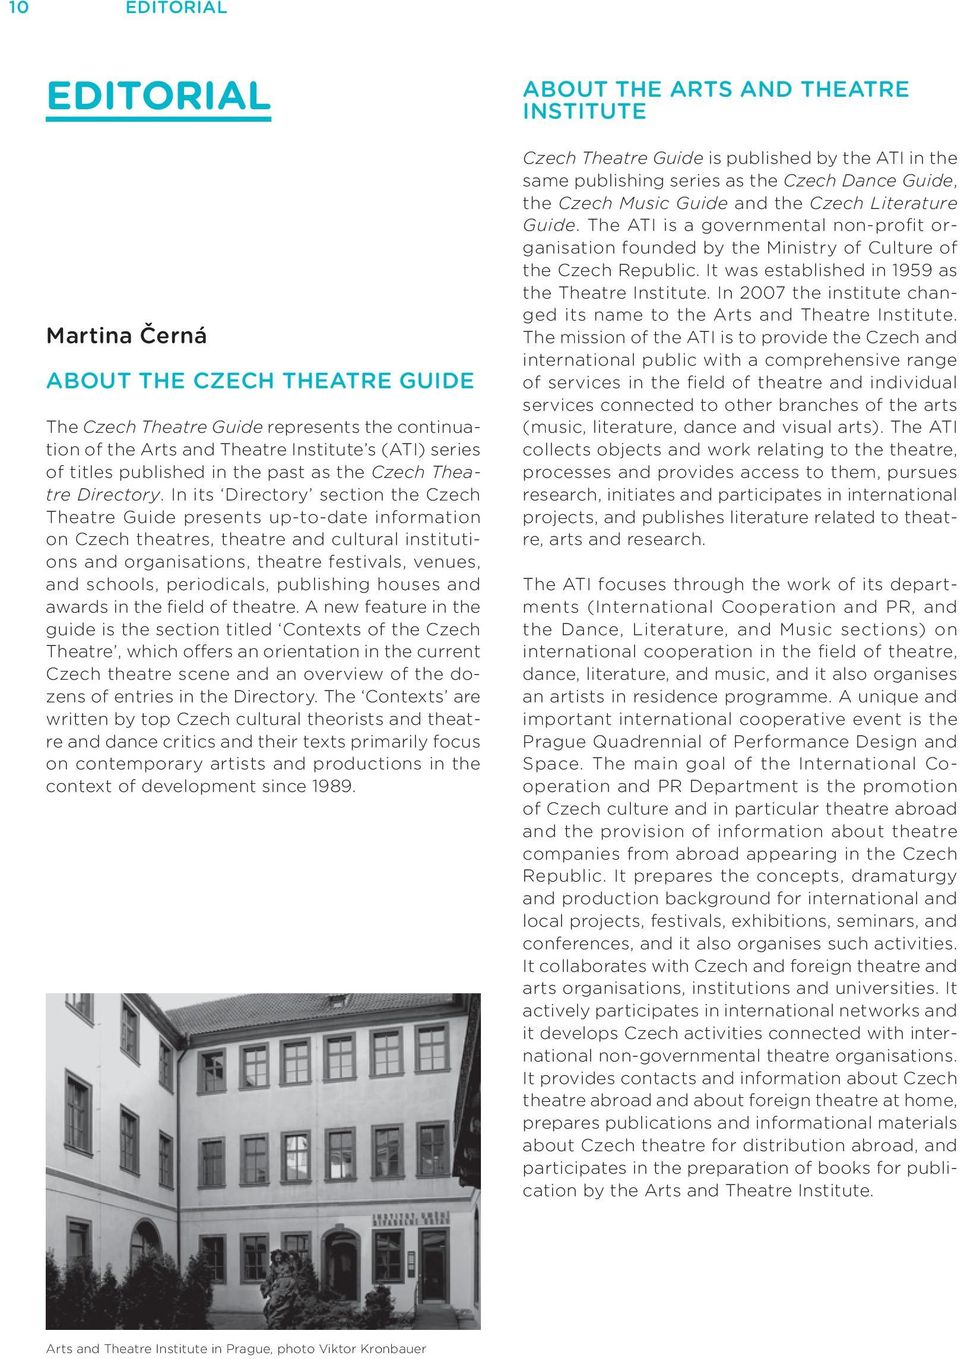 In its Directory section the Czech Theatre Guide presents up-to-date information on Czech theatres, theatre and cultural institutions and organisations, theatre festivals, venues, and schools,